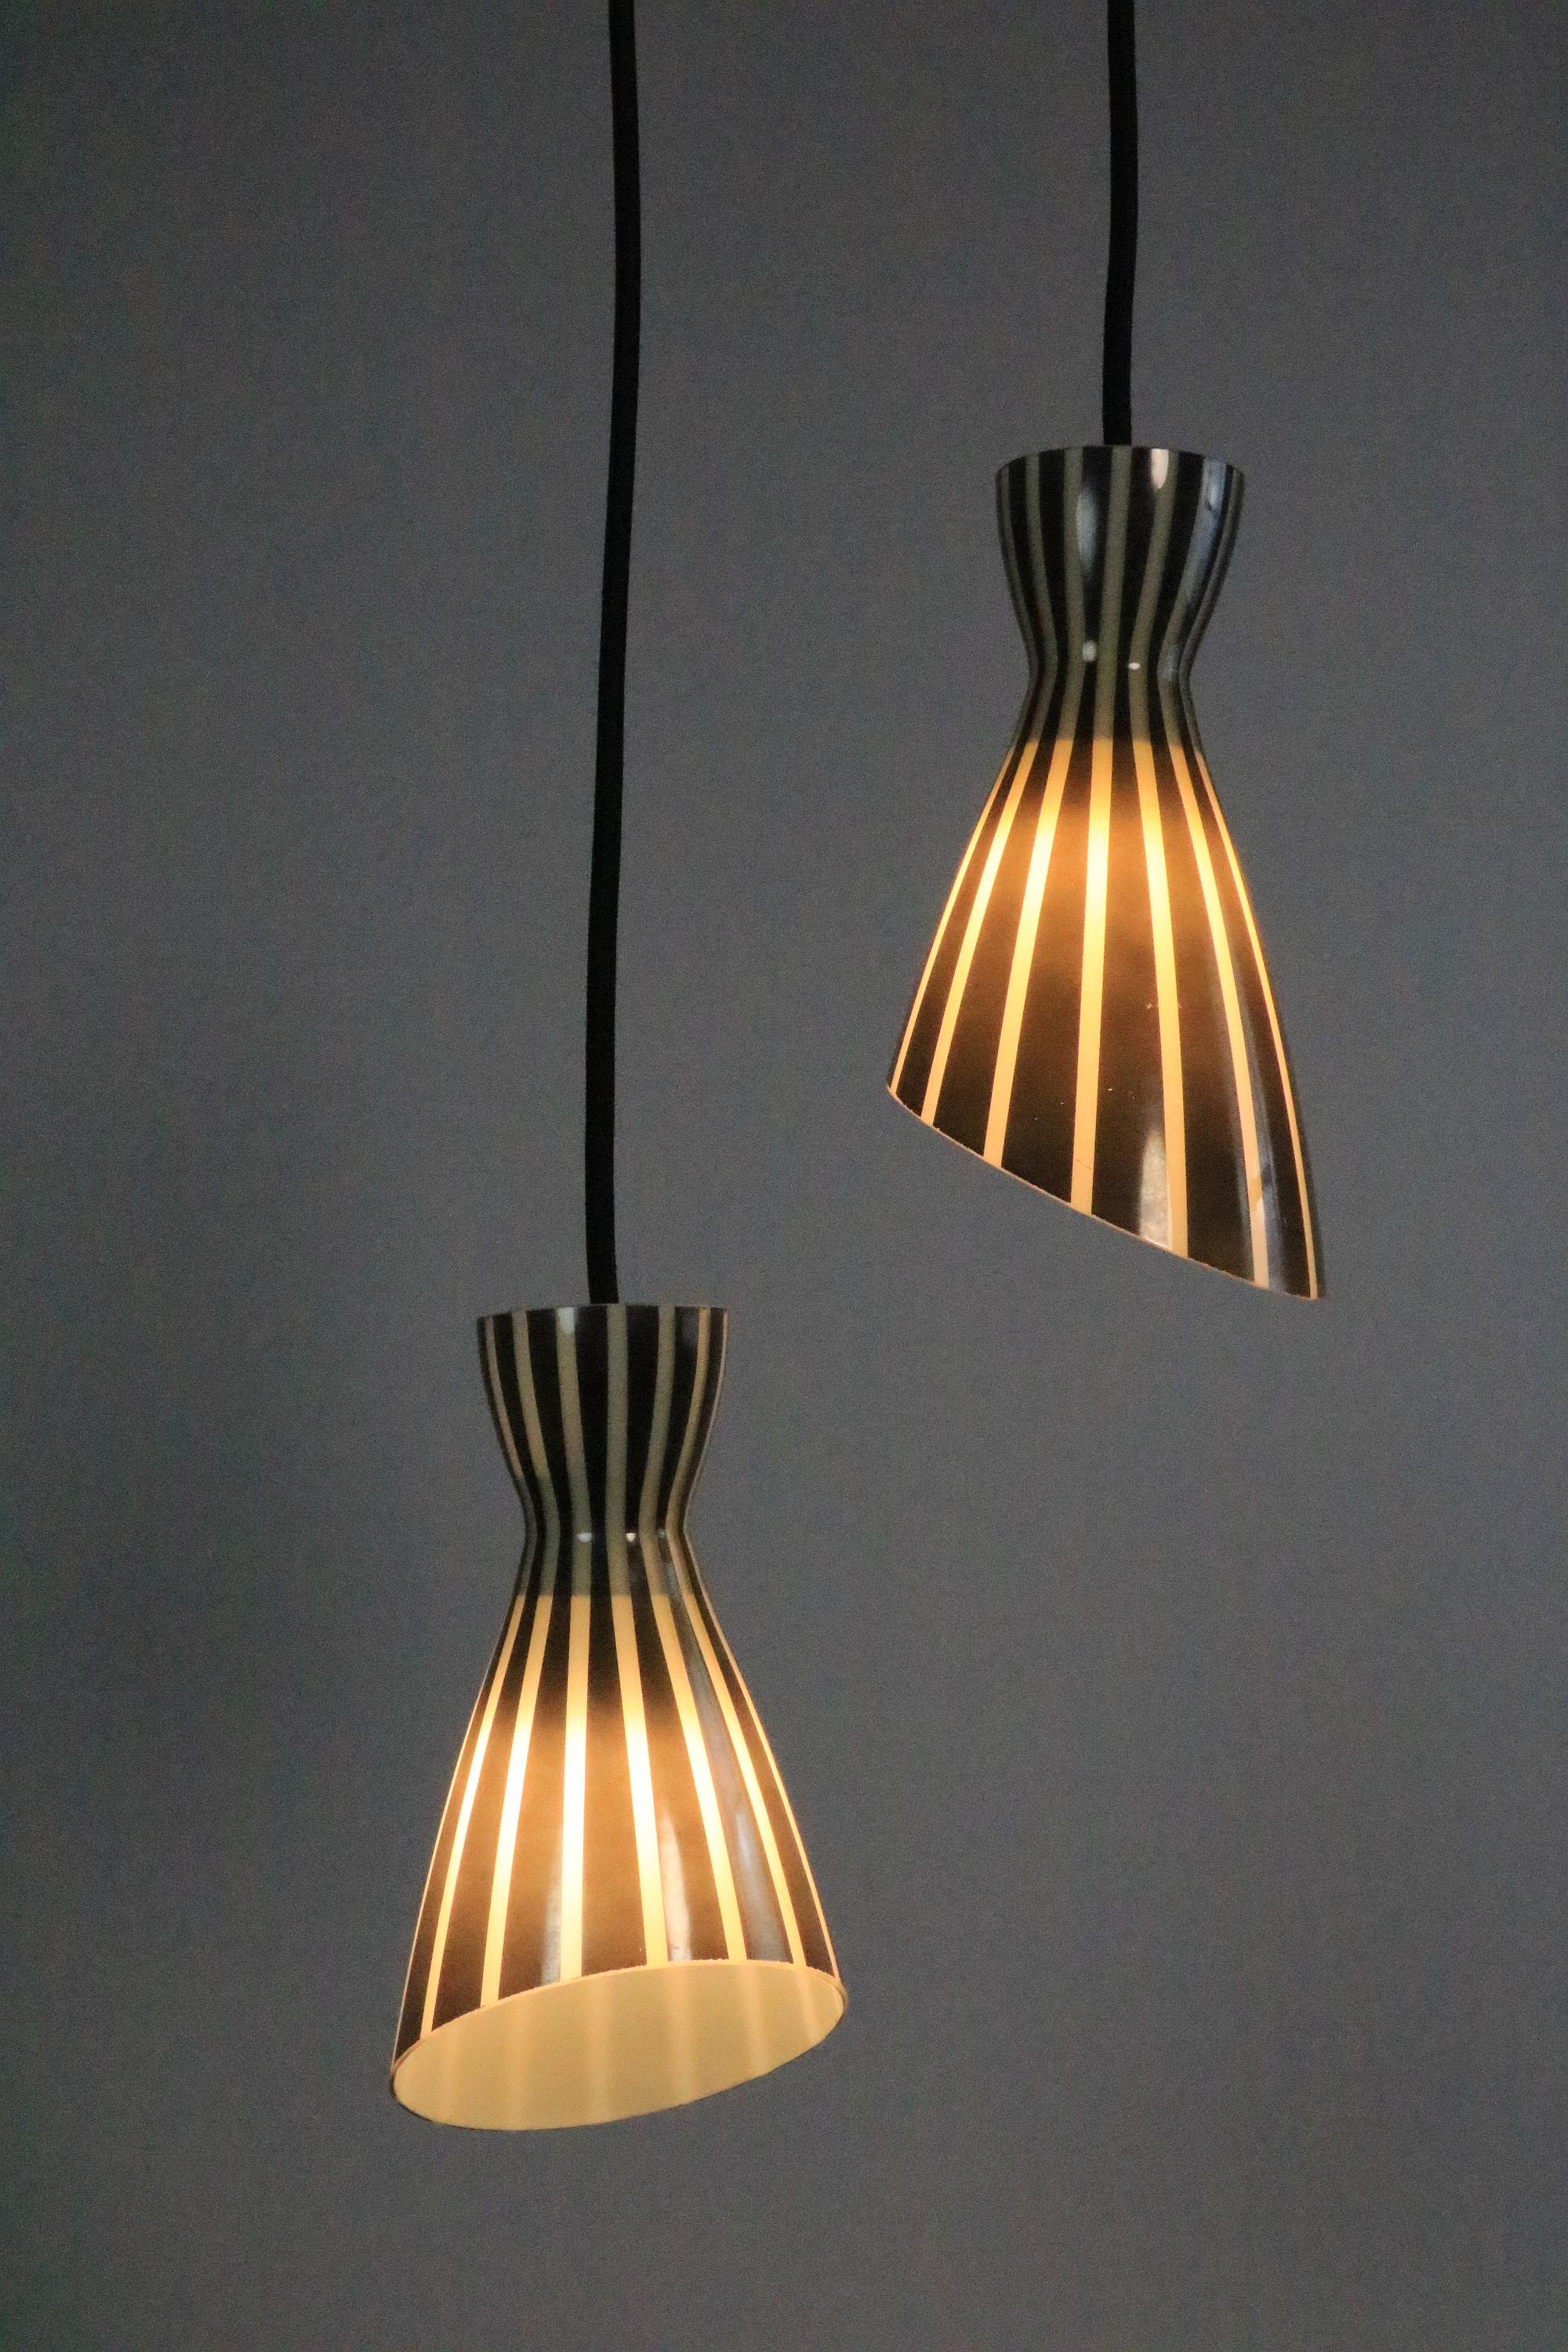 Set of 2 Glass Hanging Lamps, Black and White Striped, Original 1950s For Sale 2